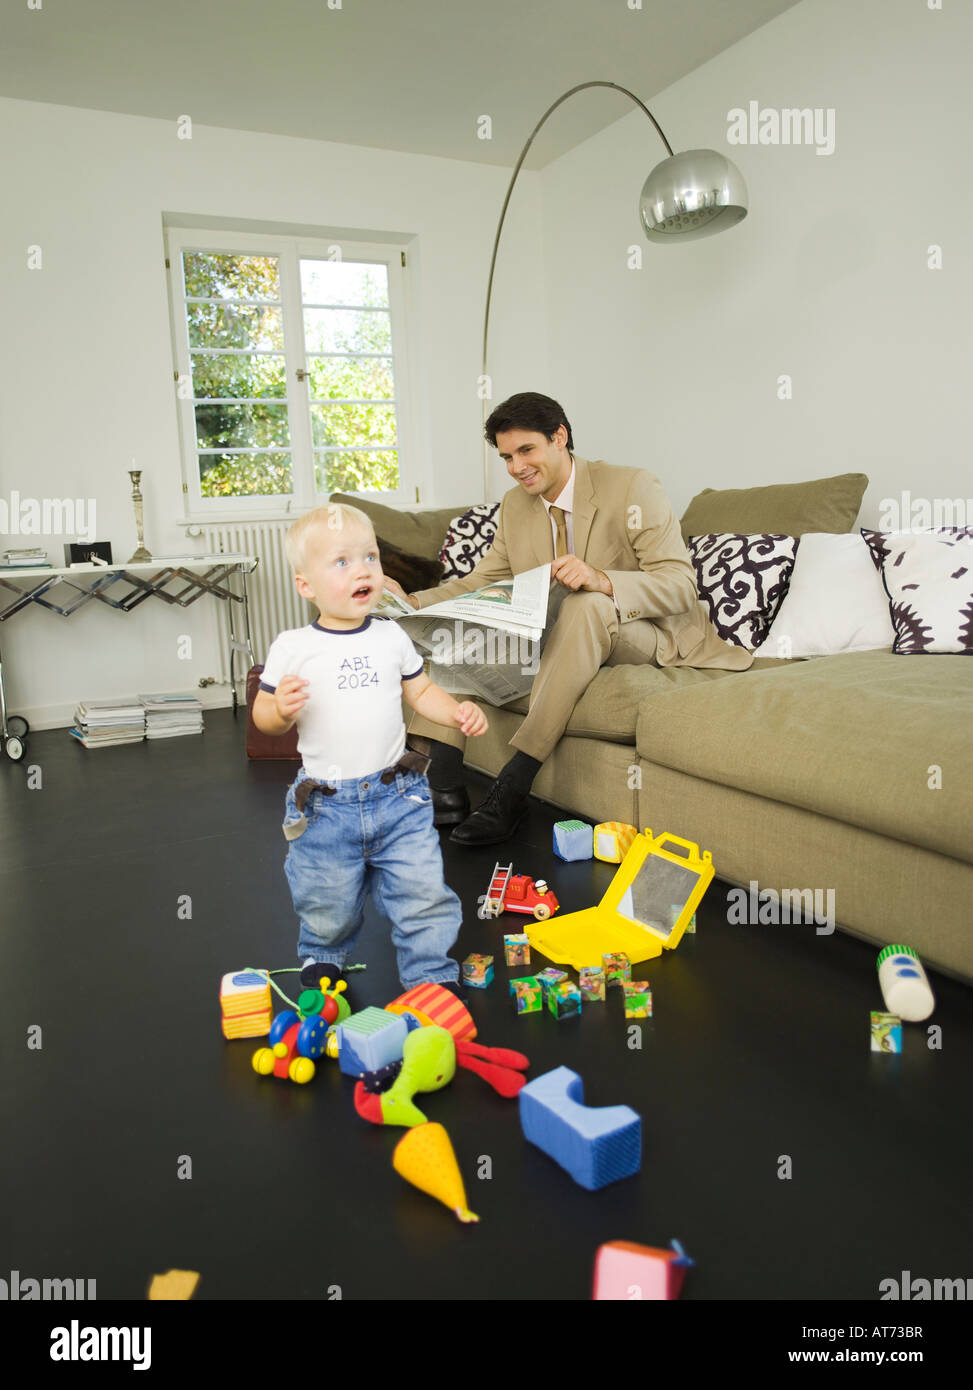 Businessman and baby son (12-24 months), in living room Stock Photo